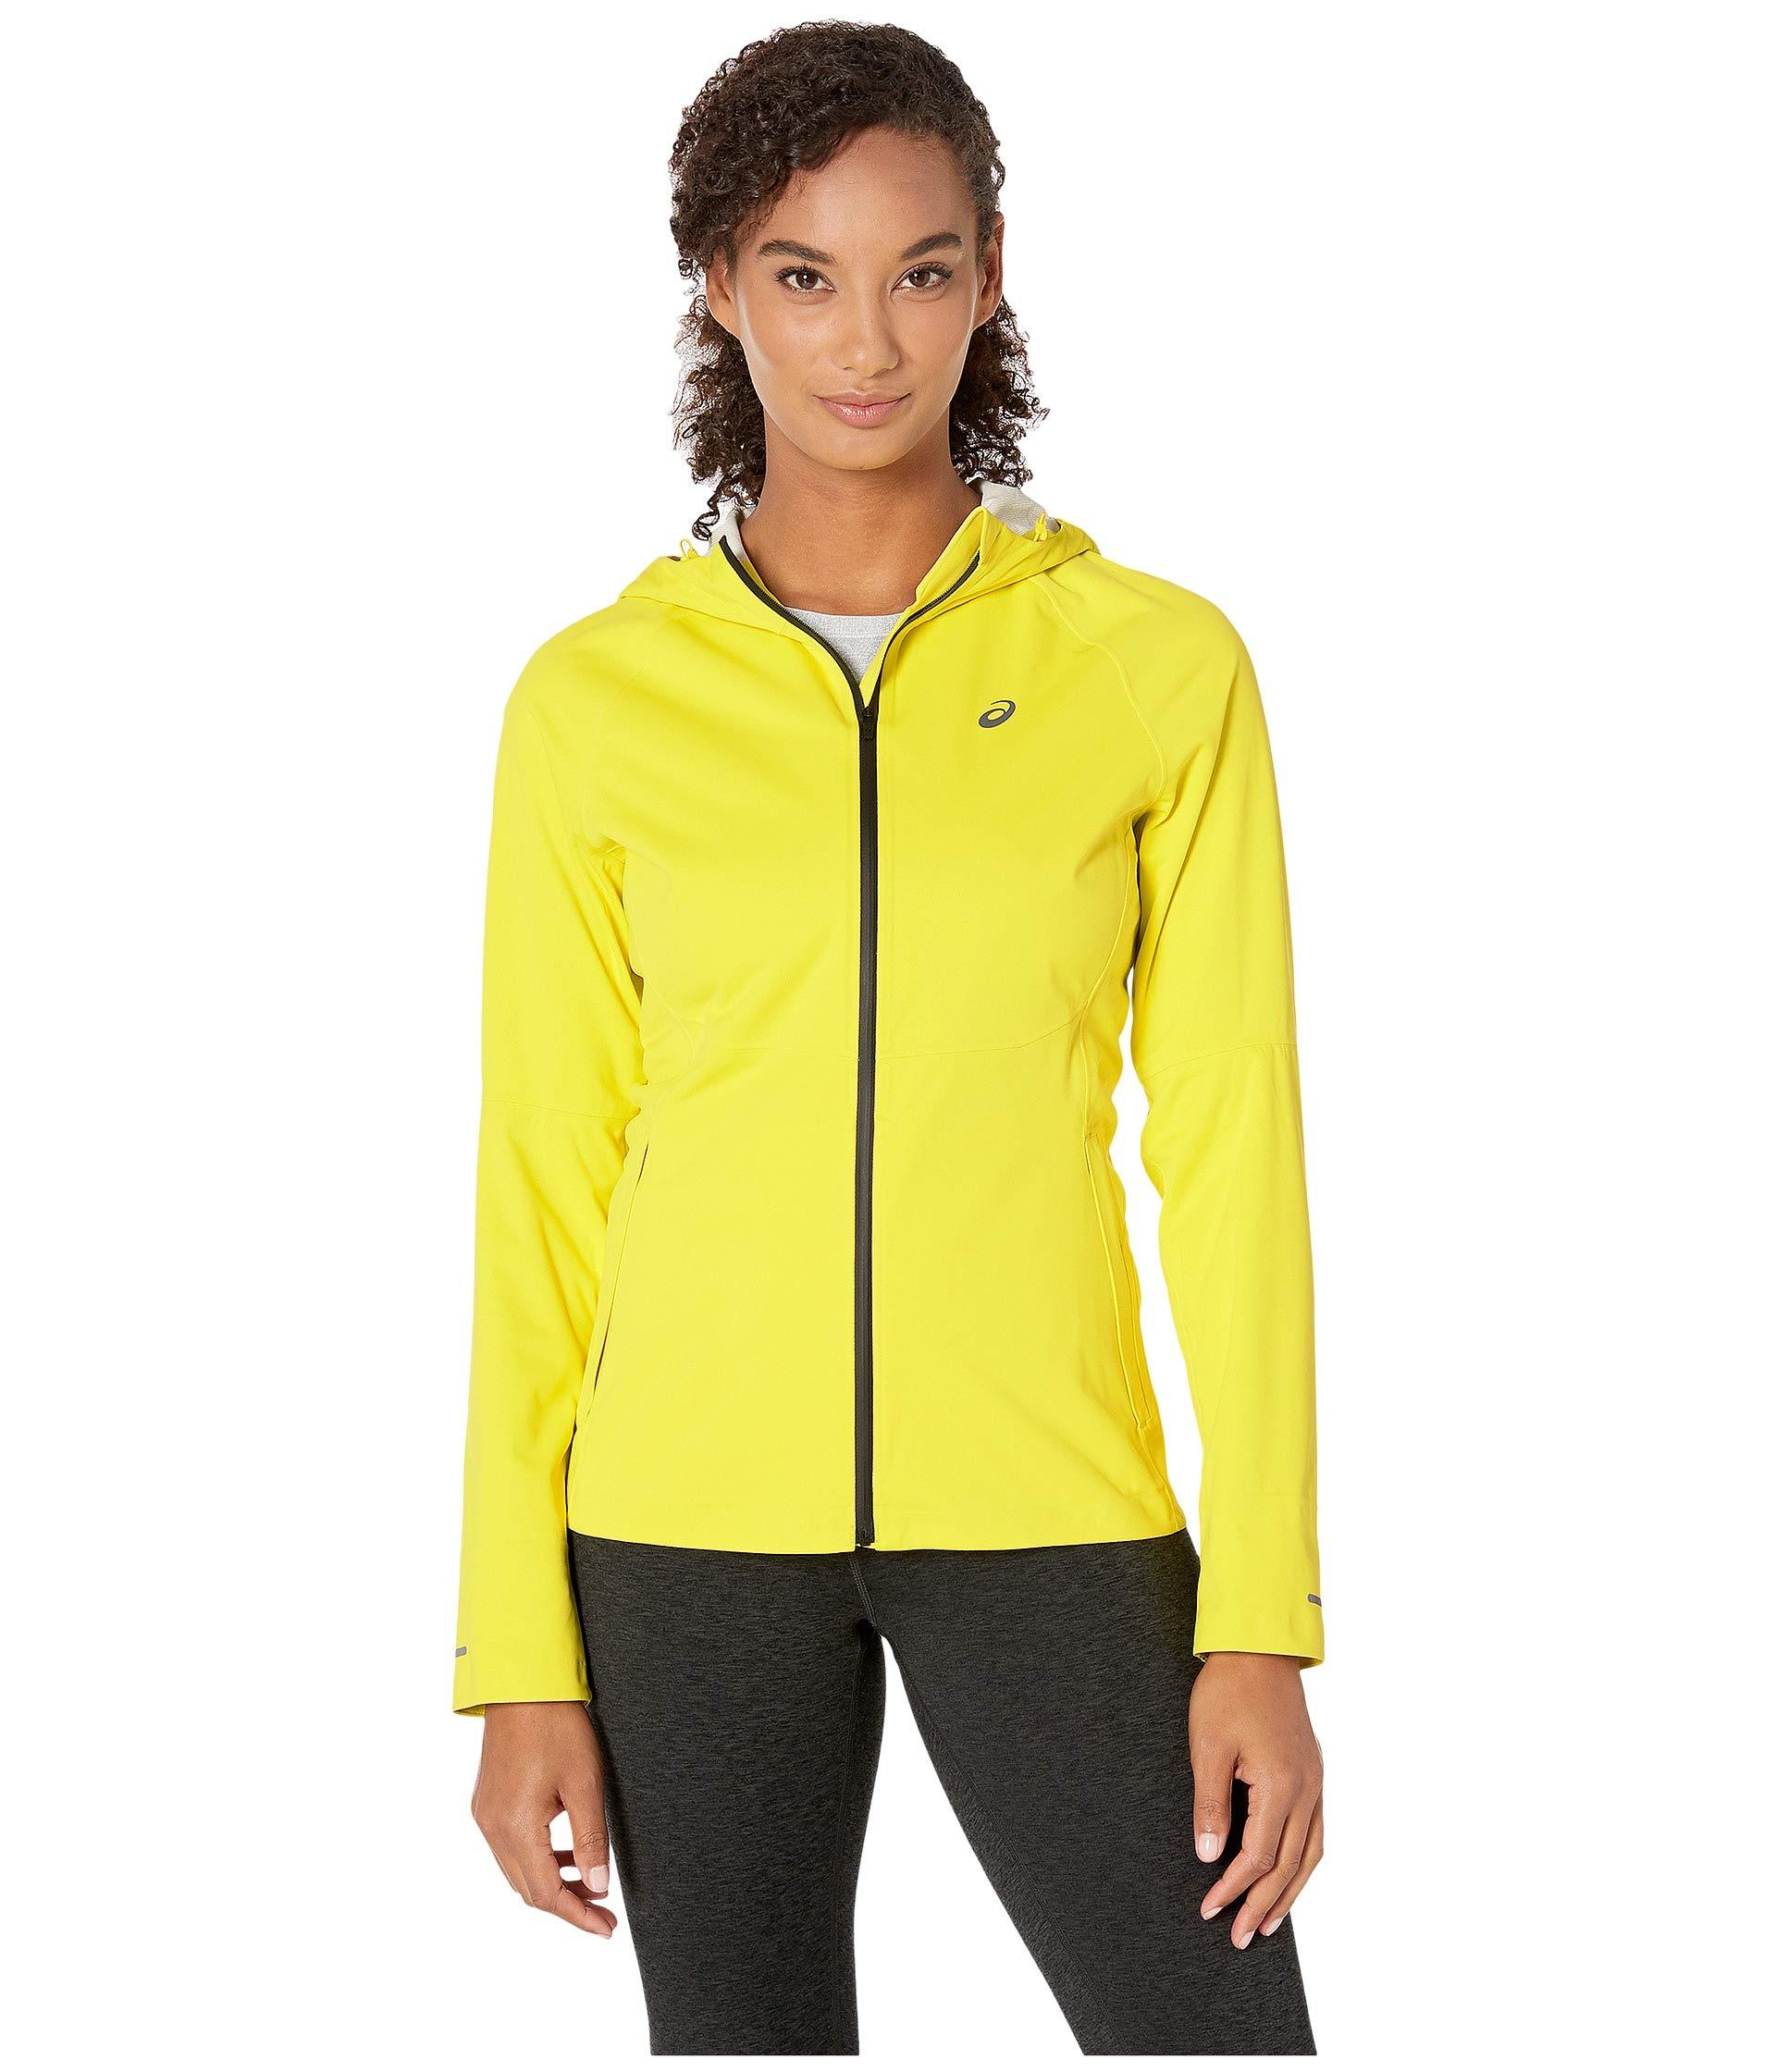 asics accelerate jacket s2,cheap - OFF 57% -domadiabuscon.in